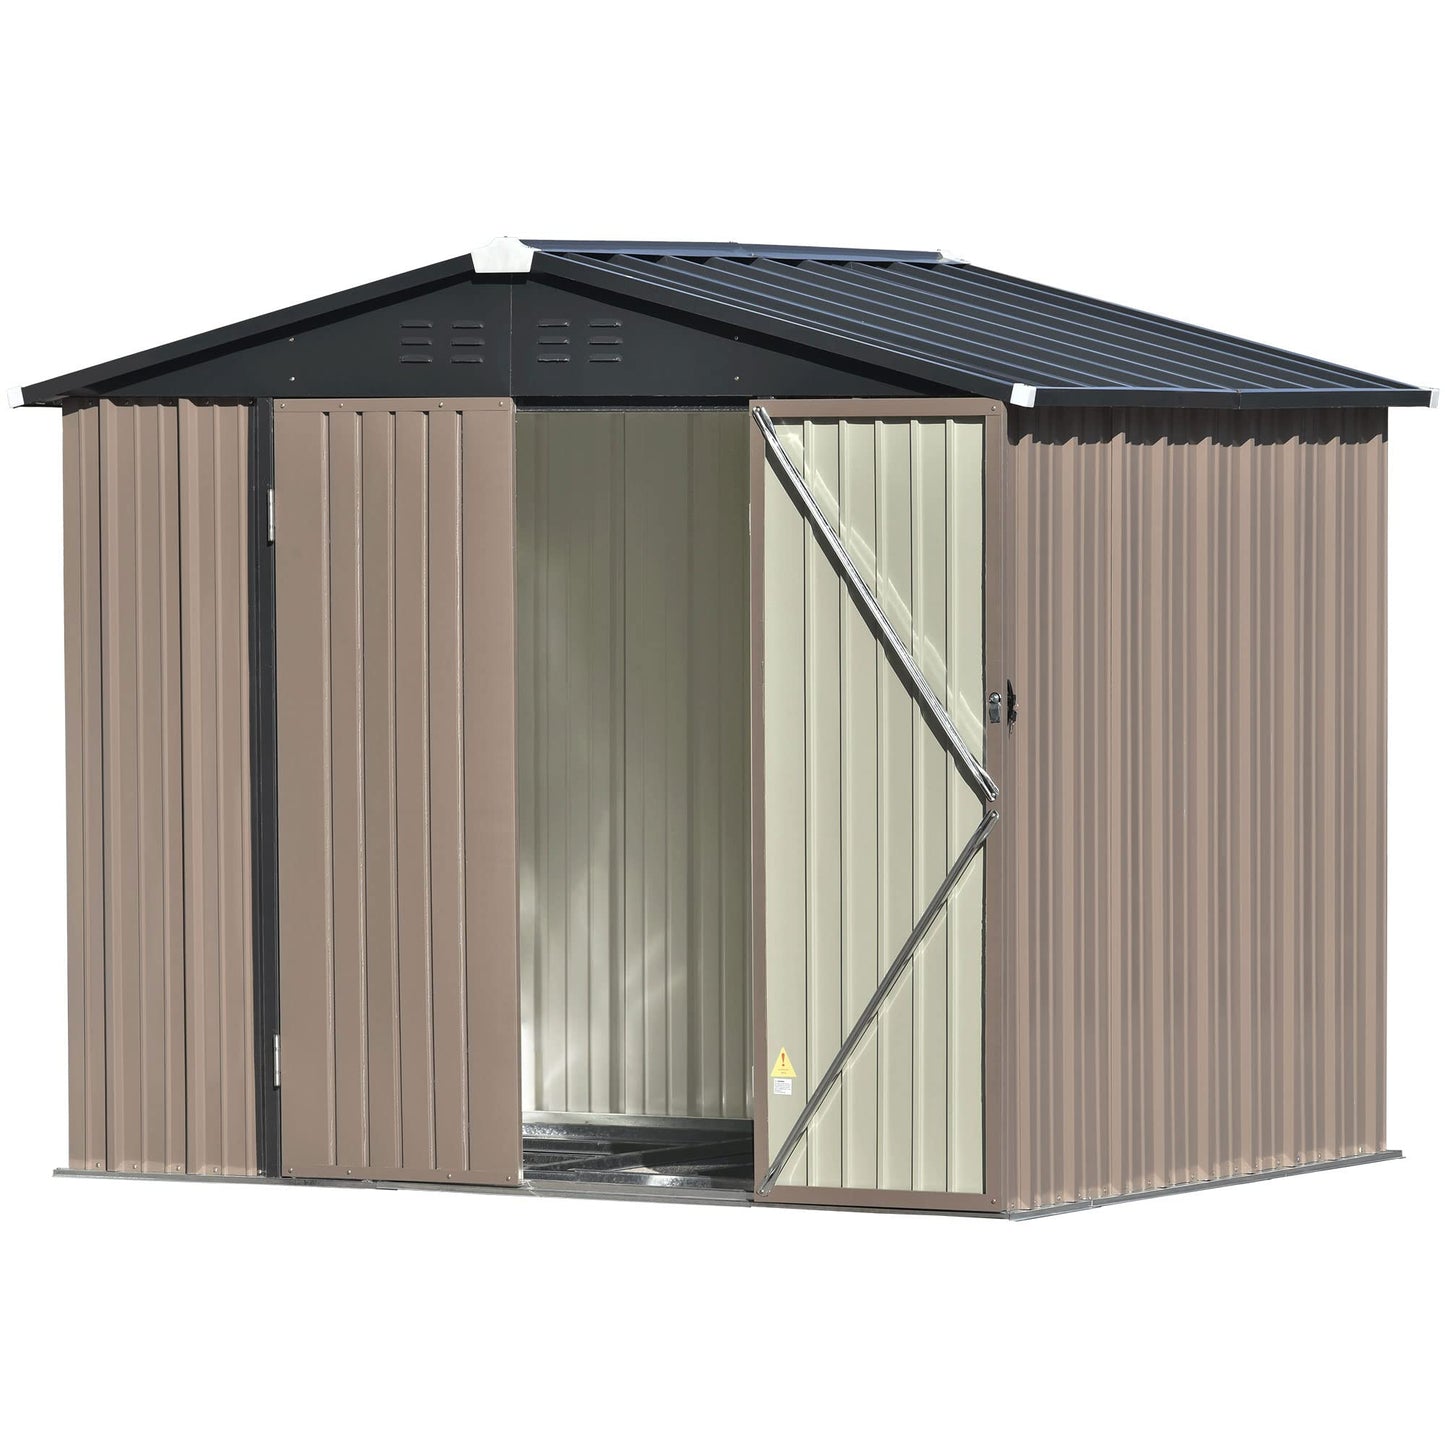 UBGO Metal Storage Shed Organizer, Garden Tool House,Patio 8x6ft Bike Shed Garden Shed, Storage Shed with Lockable Doors,Tool Cabinet with Vents and Foundation Frame for Backyard,Lawn,Garden,Brown 6x8 FT Metal Storage Shed Brown-2